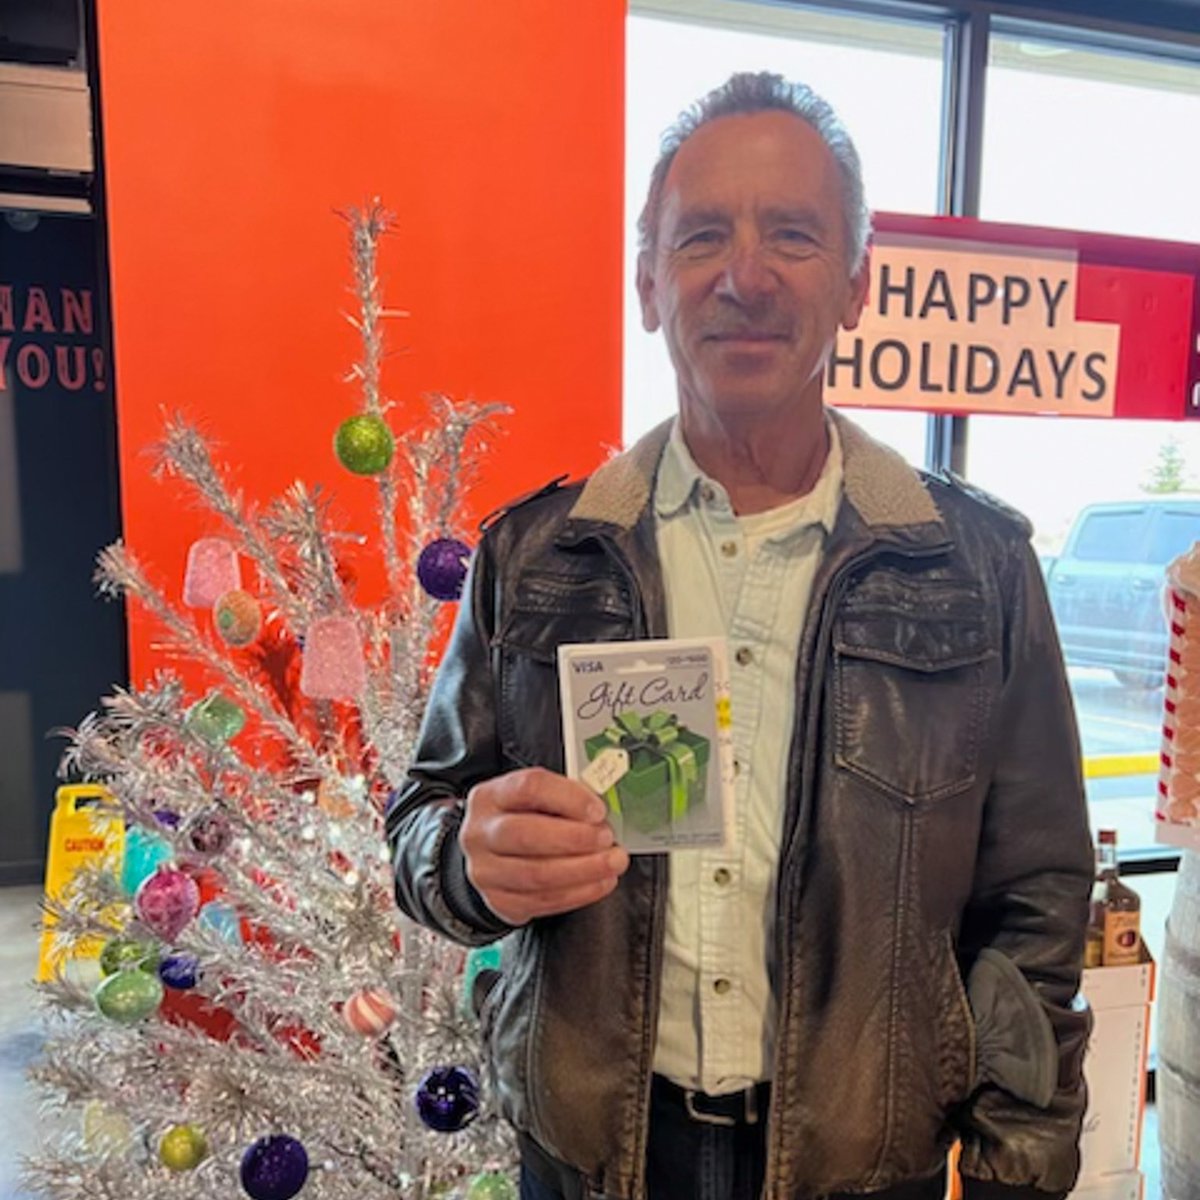 🎉CONGRATULATIONS to the final winner of $500 Gift Card for the 12 Days of Savings, Gifts, & Giveaways! Three cheers to Mr. & Mrs. O from the Gay's Hops-N-Schnapps store at 101 Growth Parkway #Angola!! And a BIG THANK YOU to all who participated! It was a great send-off of 2023!